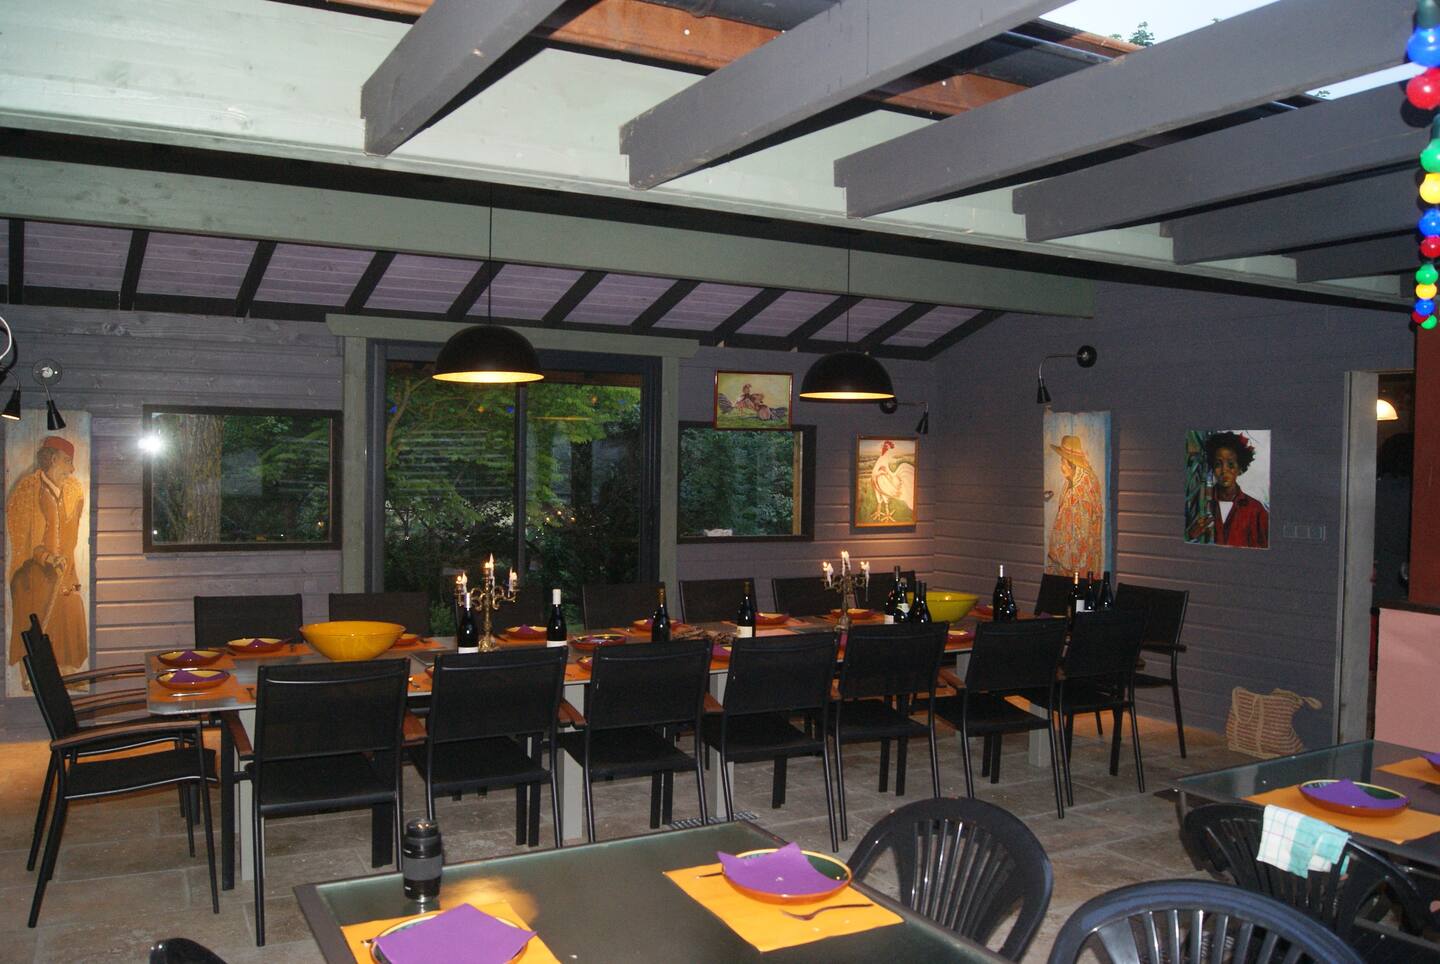 A large dining area for large number of guests